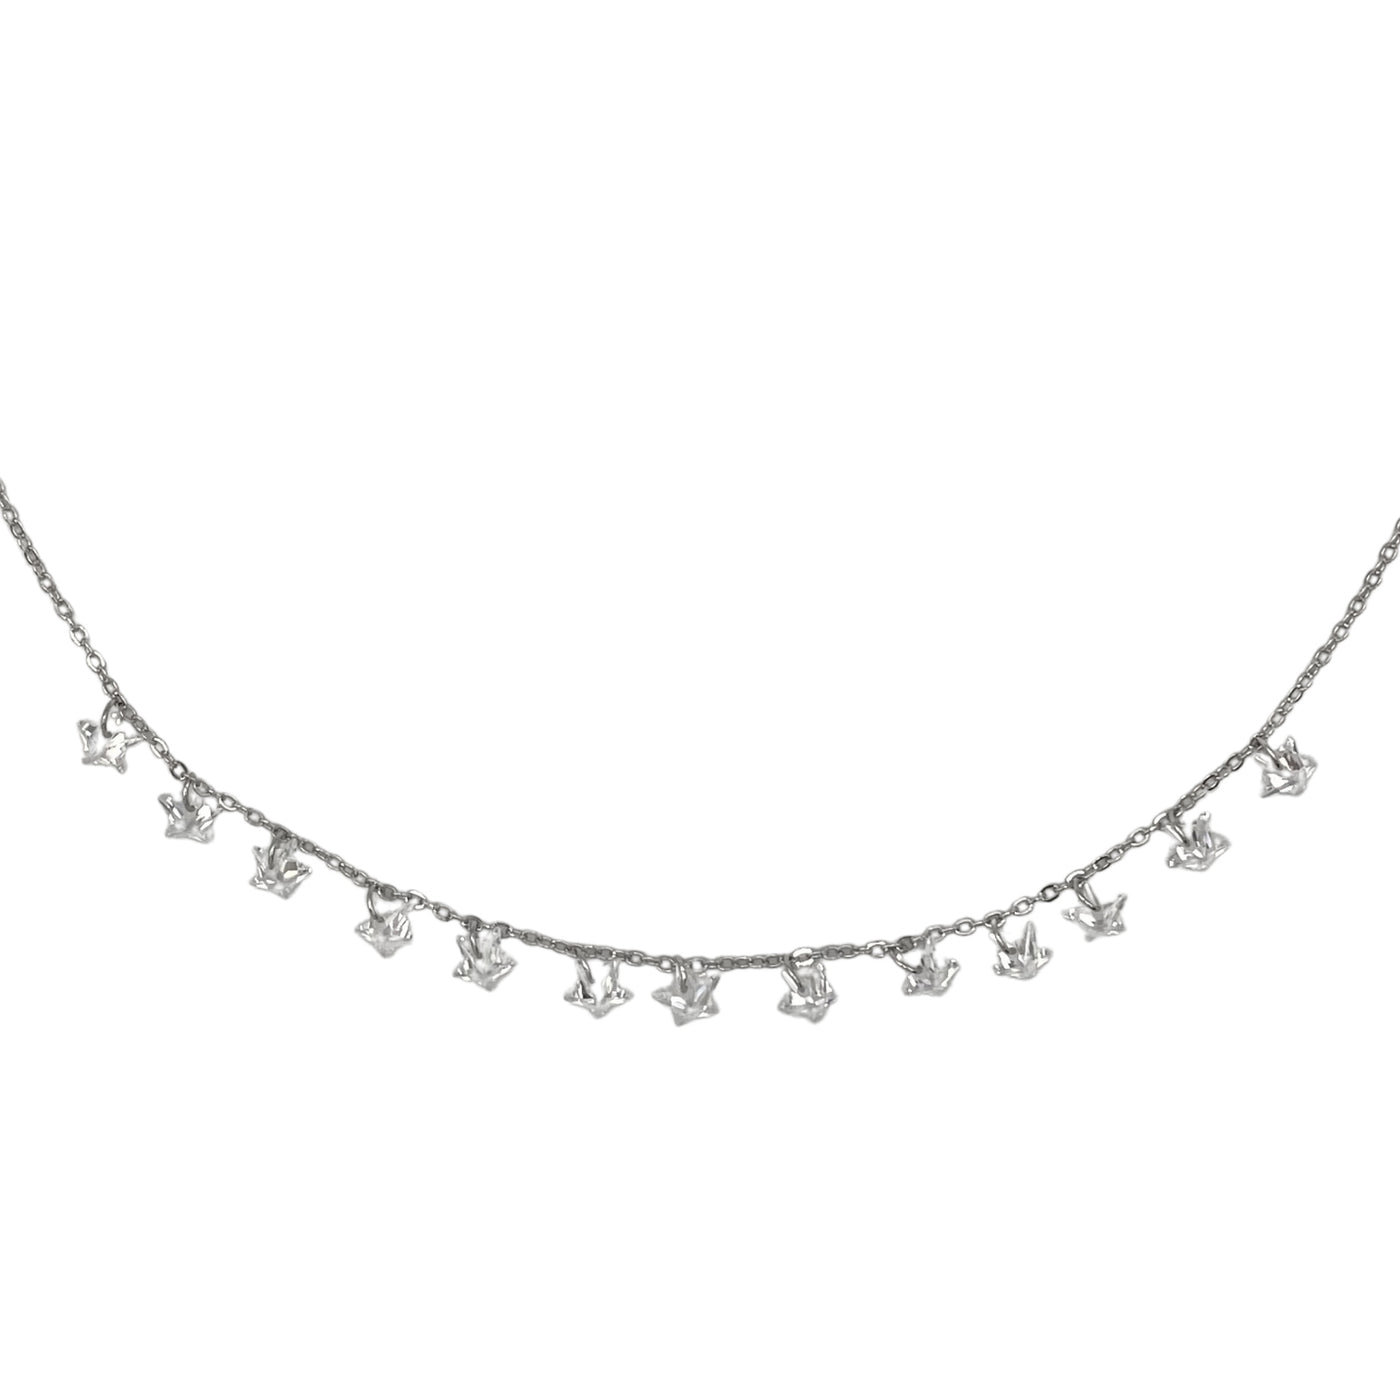 Silver necklace with zirconia stars charms